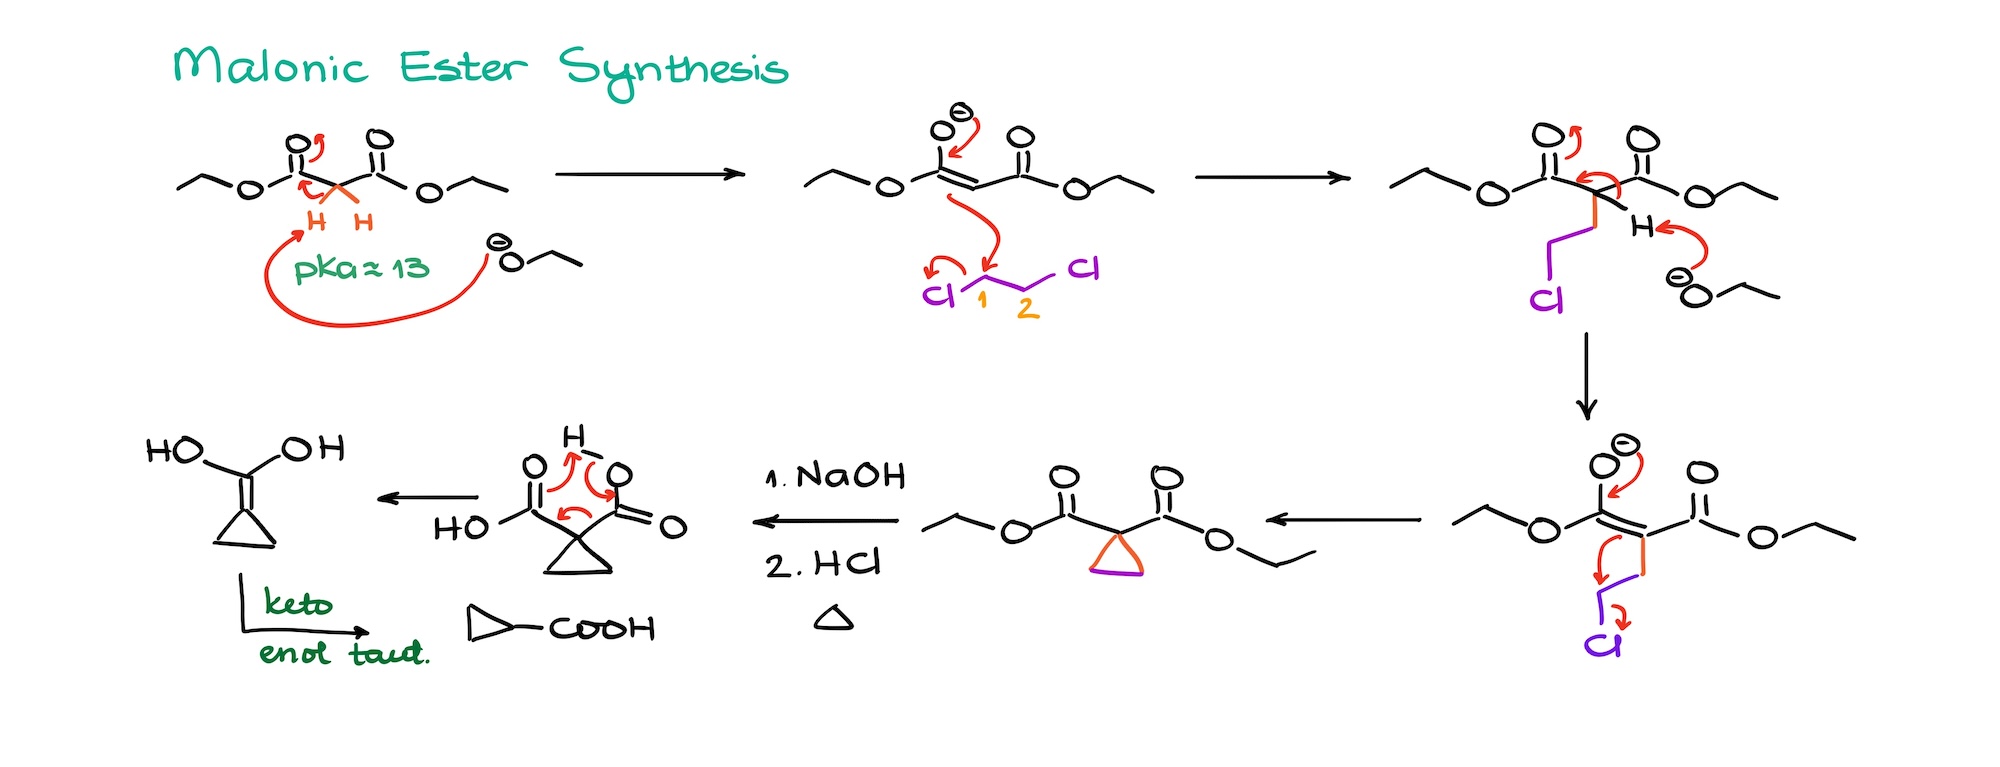 malonic ester synthesis approach to synthesis of cyclopropanecarboxylic acid